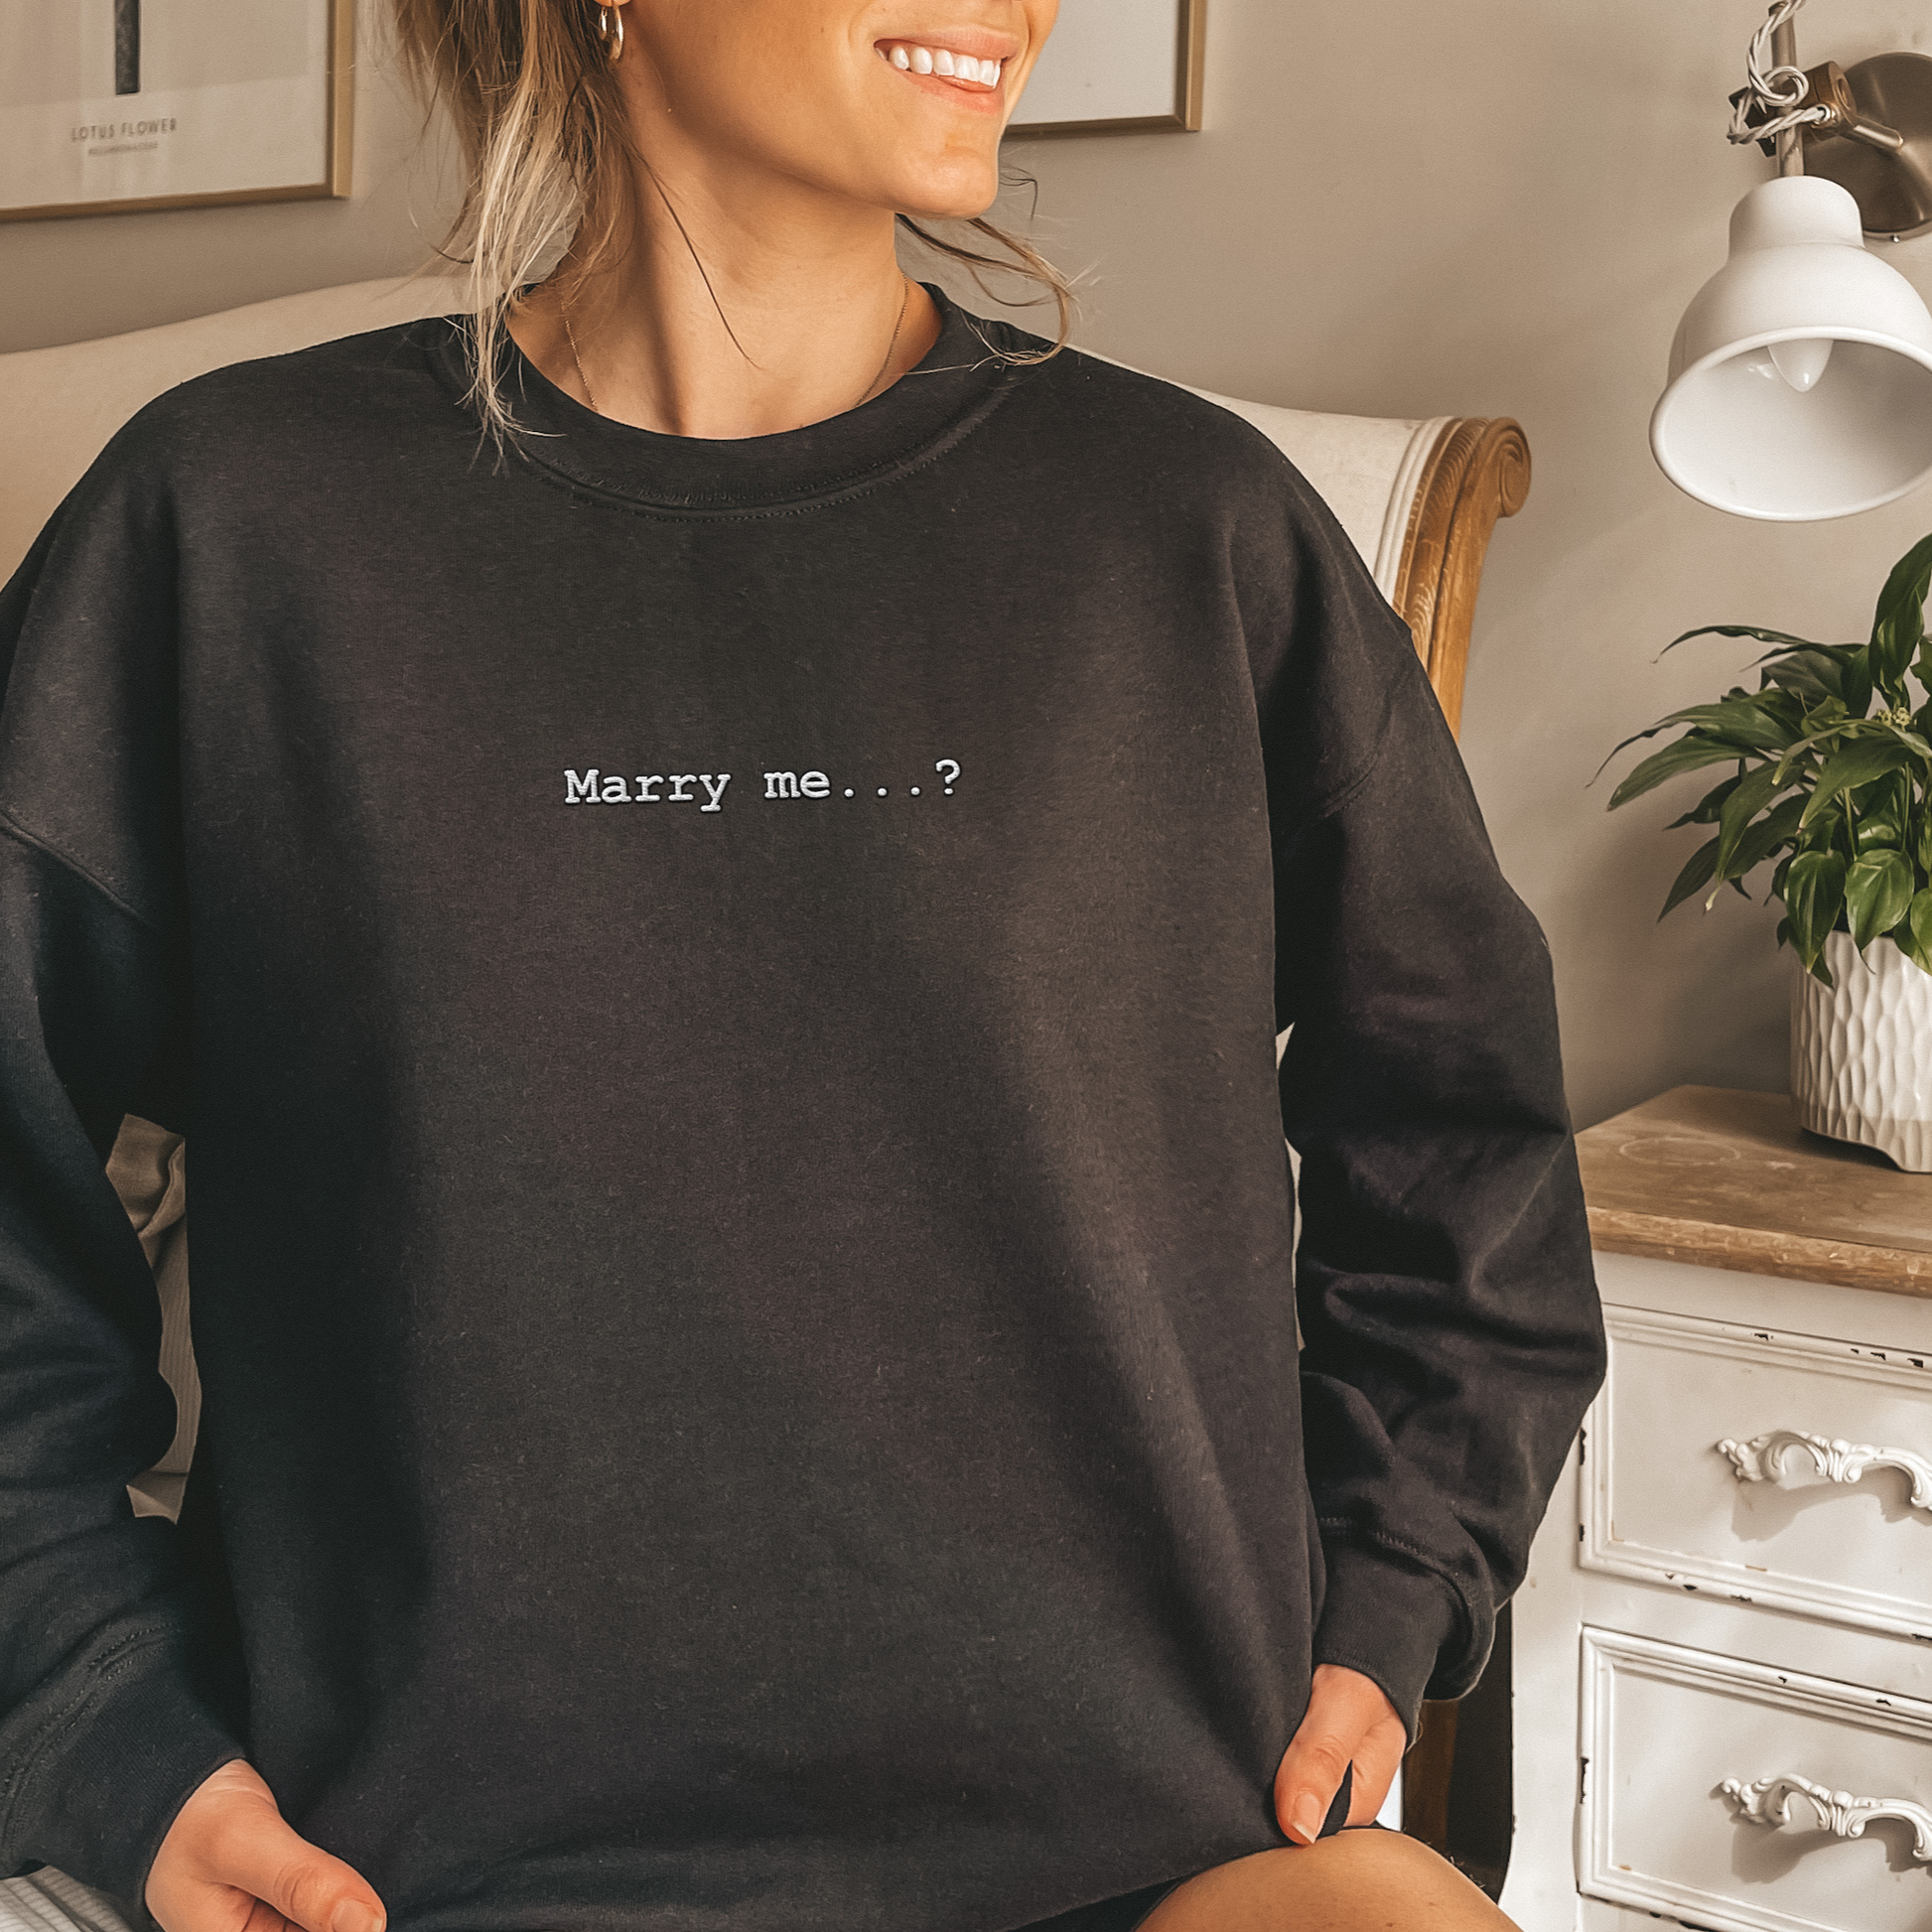 Ask them to marry you with our embroidered sweatshirt